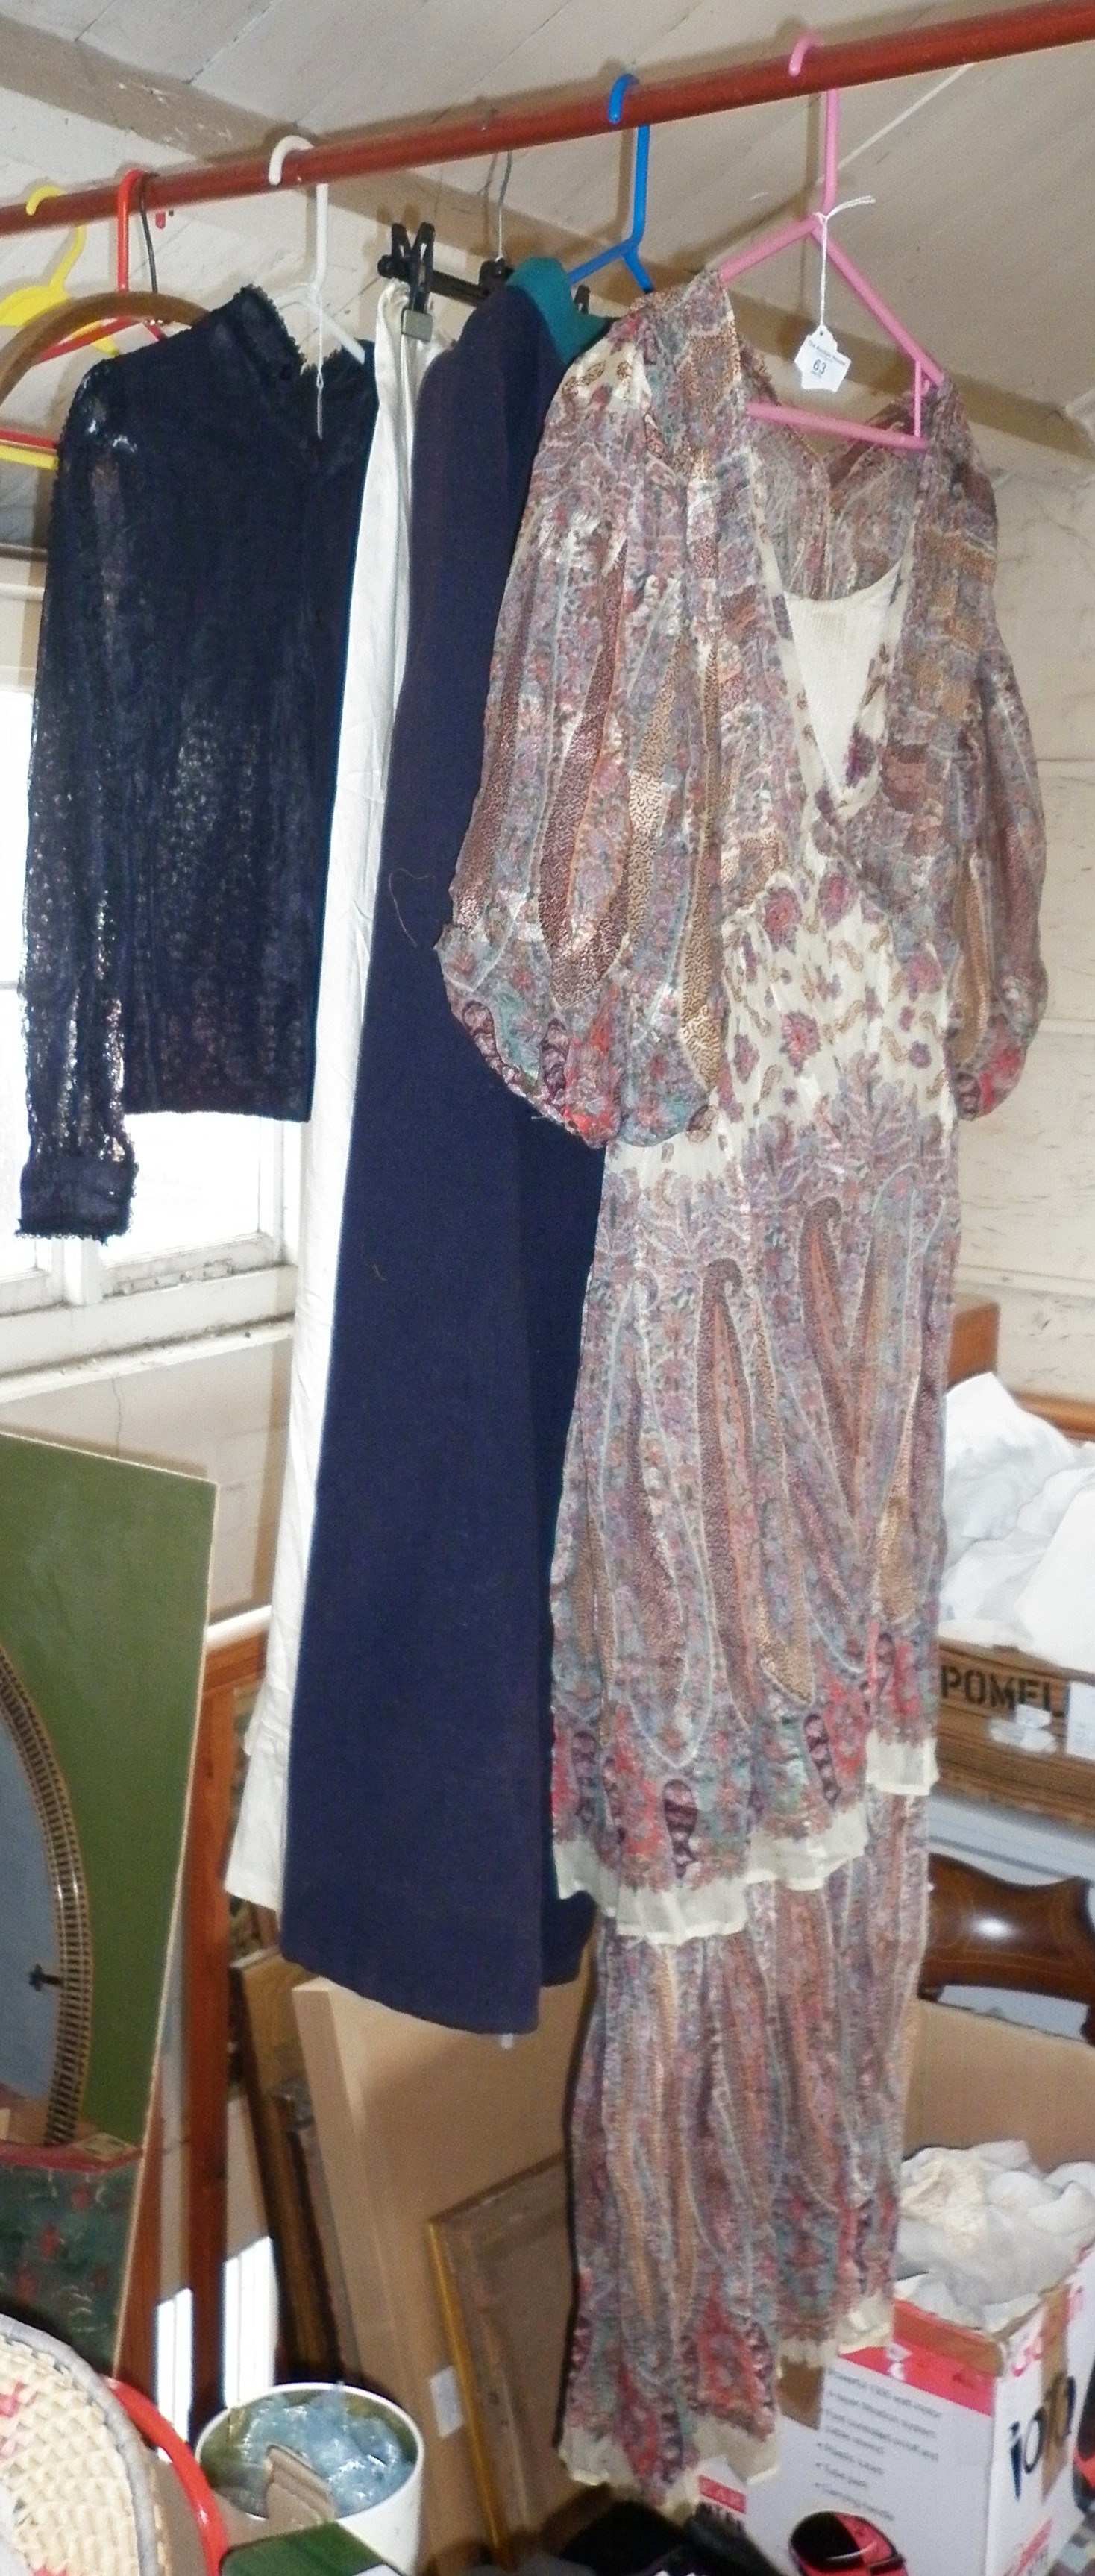 Vintage clothing - silk dress made from an old shawl, a cape etc. and assorted lacework